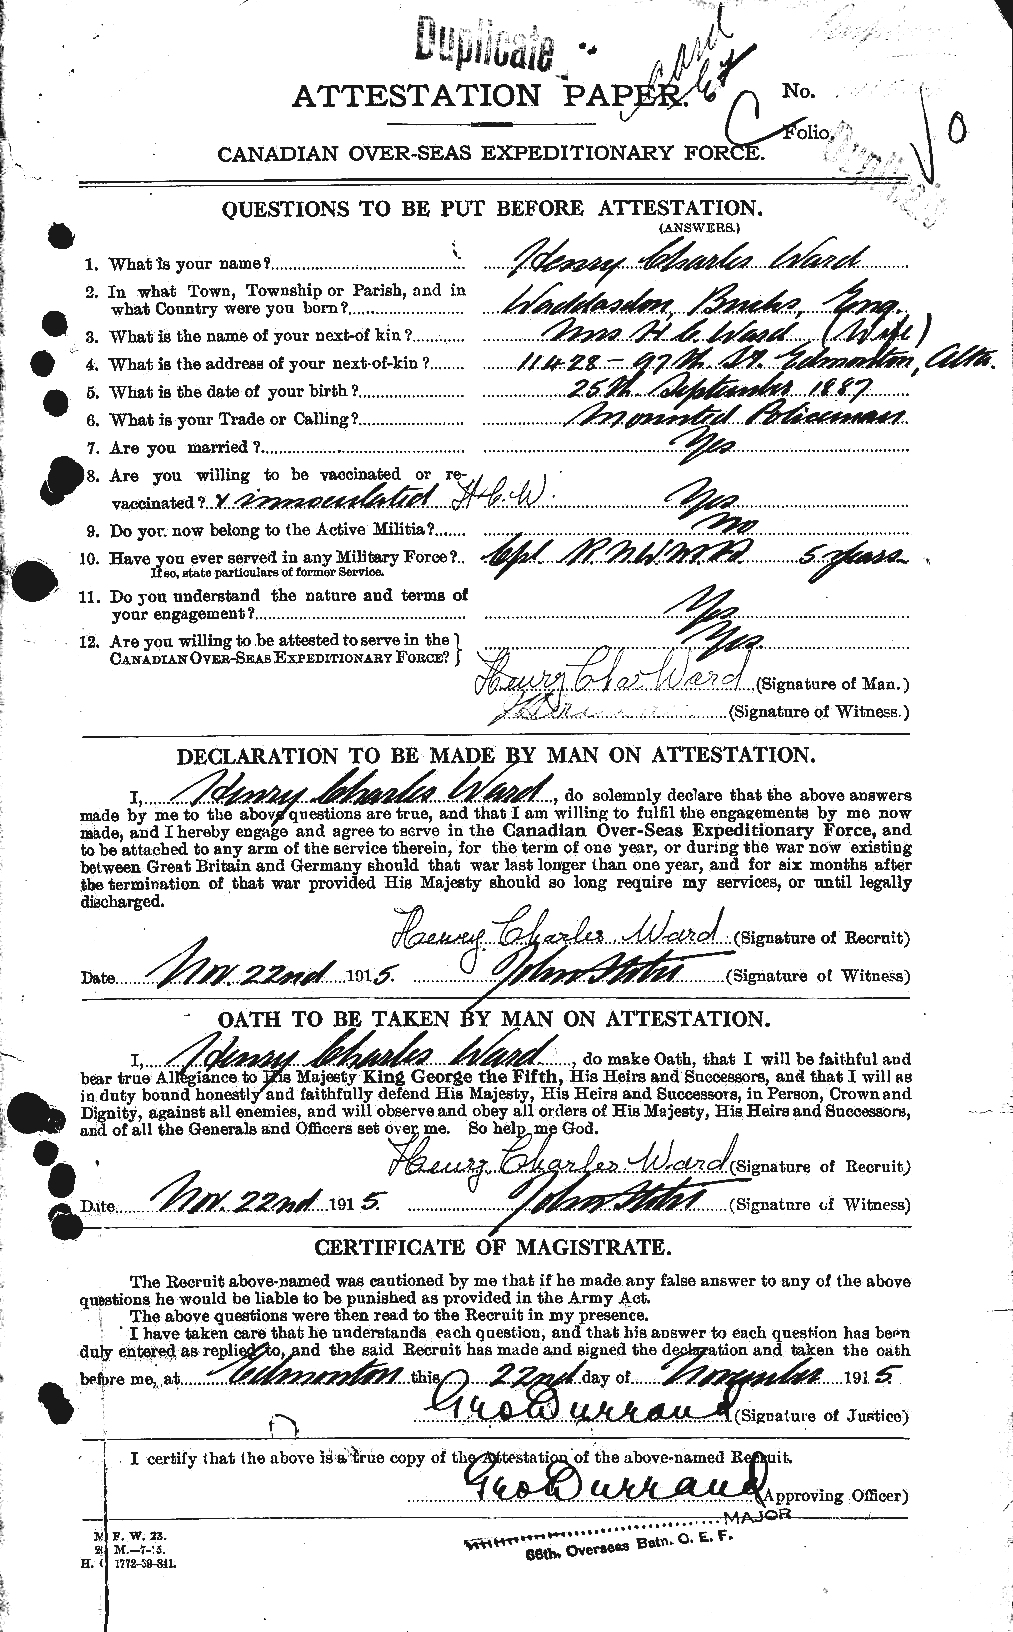 Personnel Records of the First World War - CEF 657832a